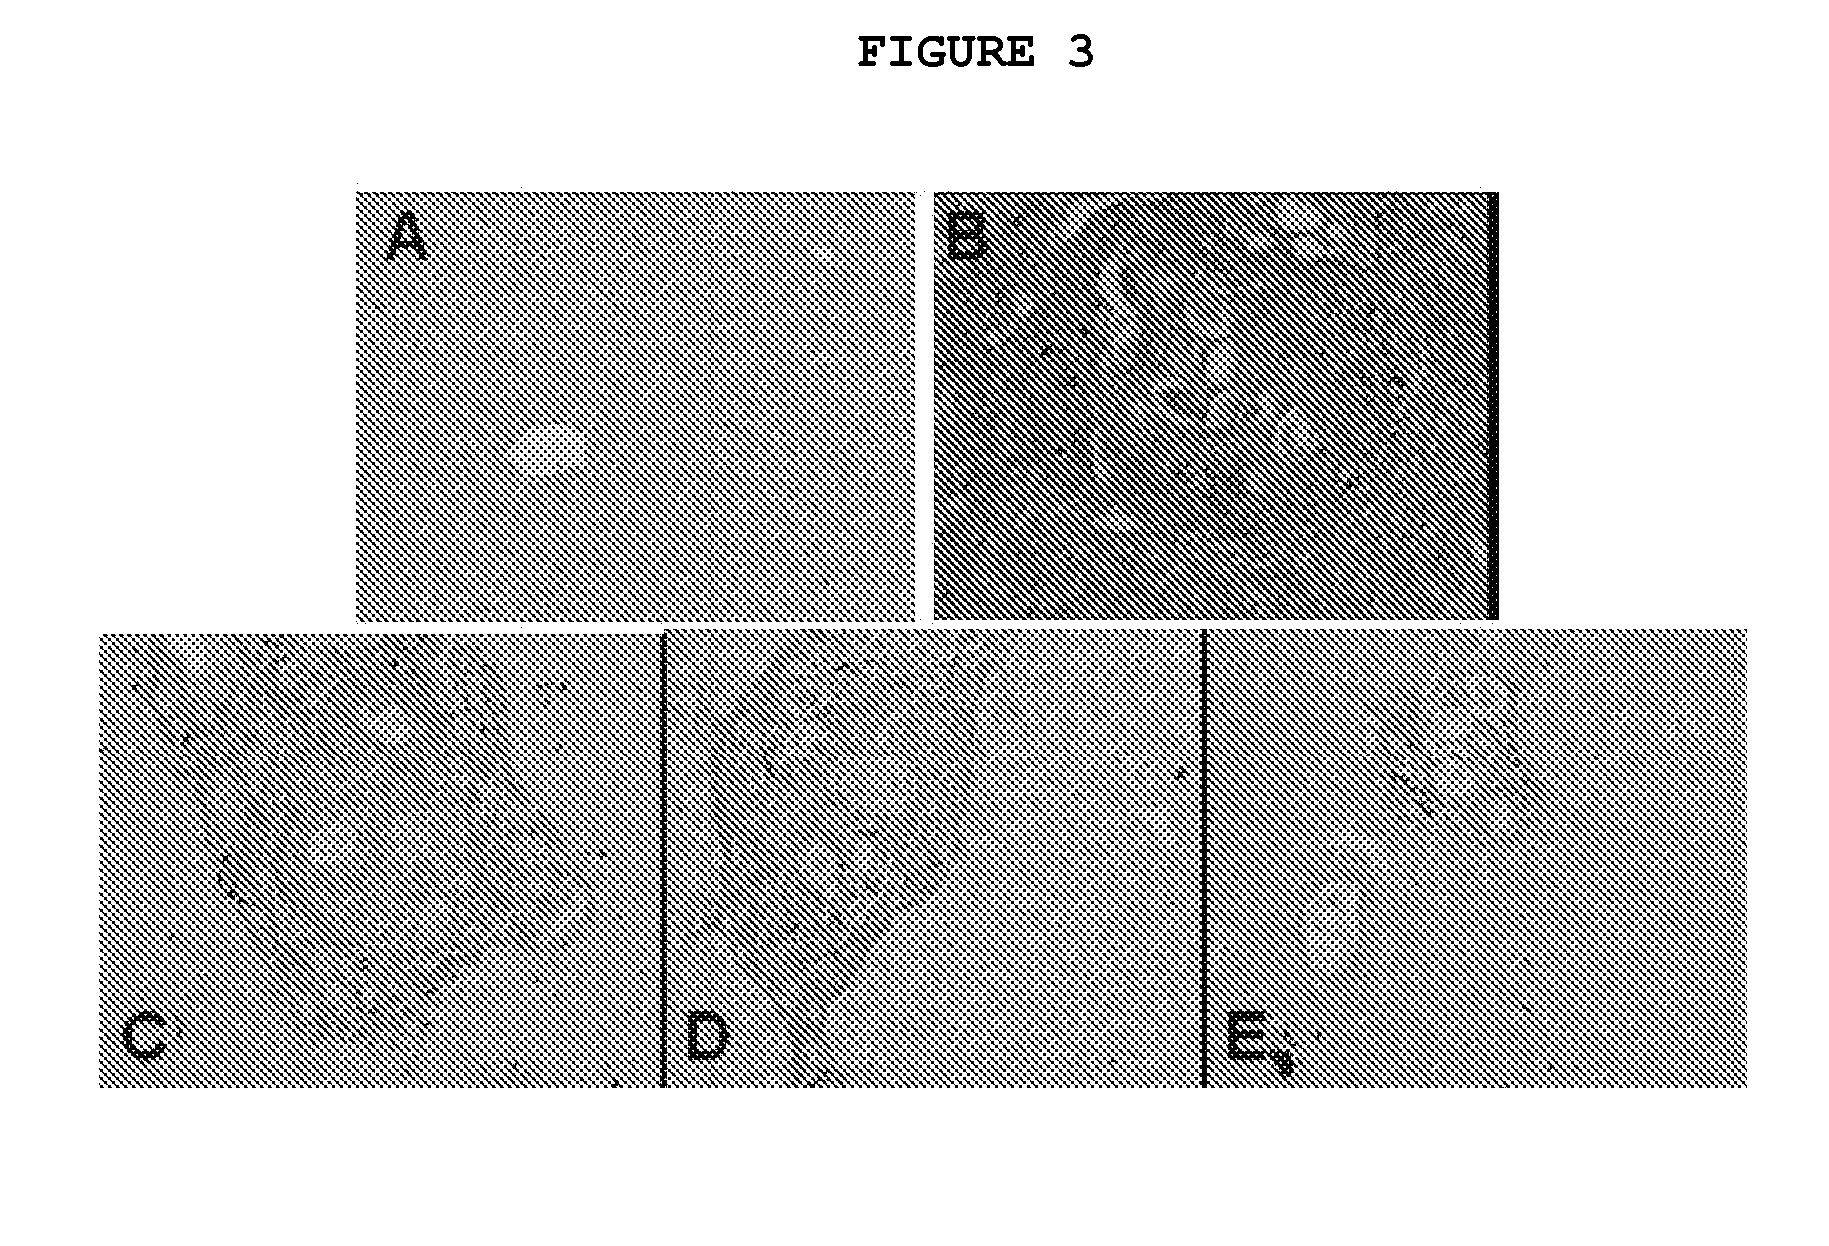 Composition and Method for Treating Fibrotic Diseases